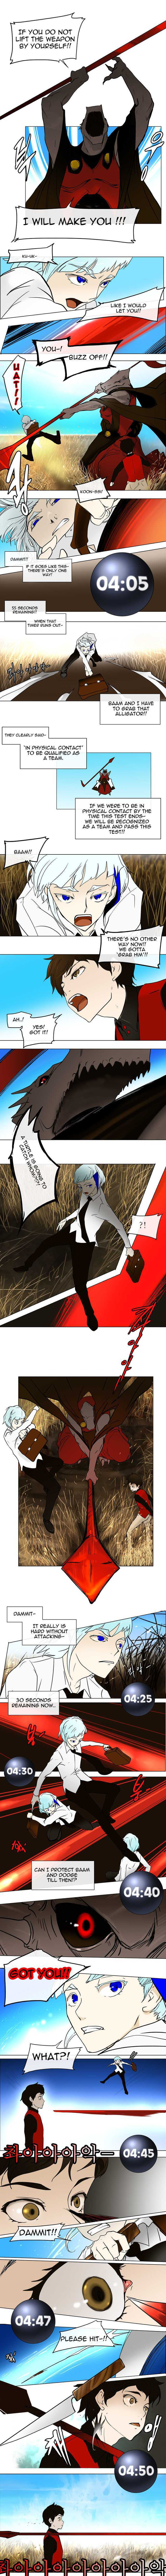 Tower of God 8